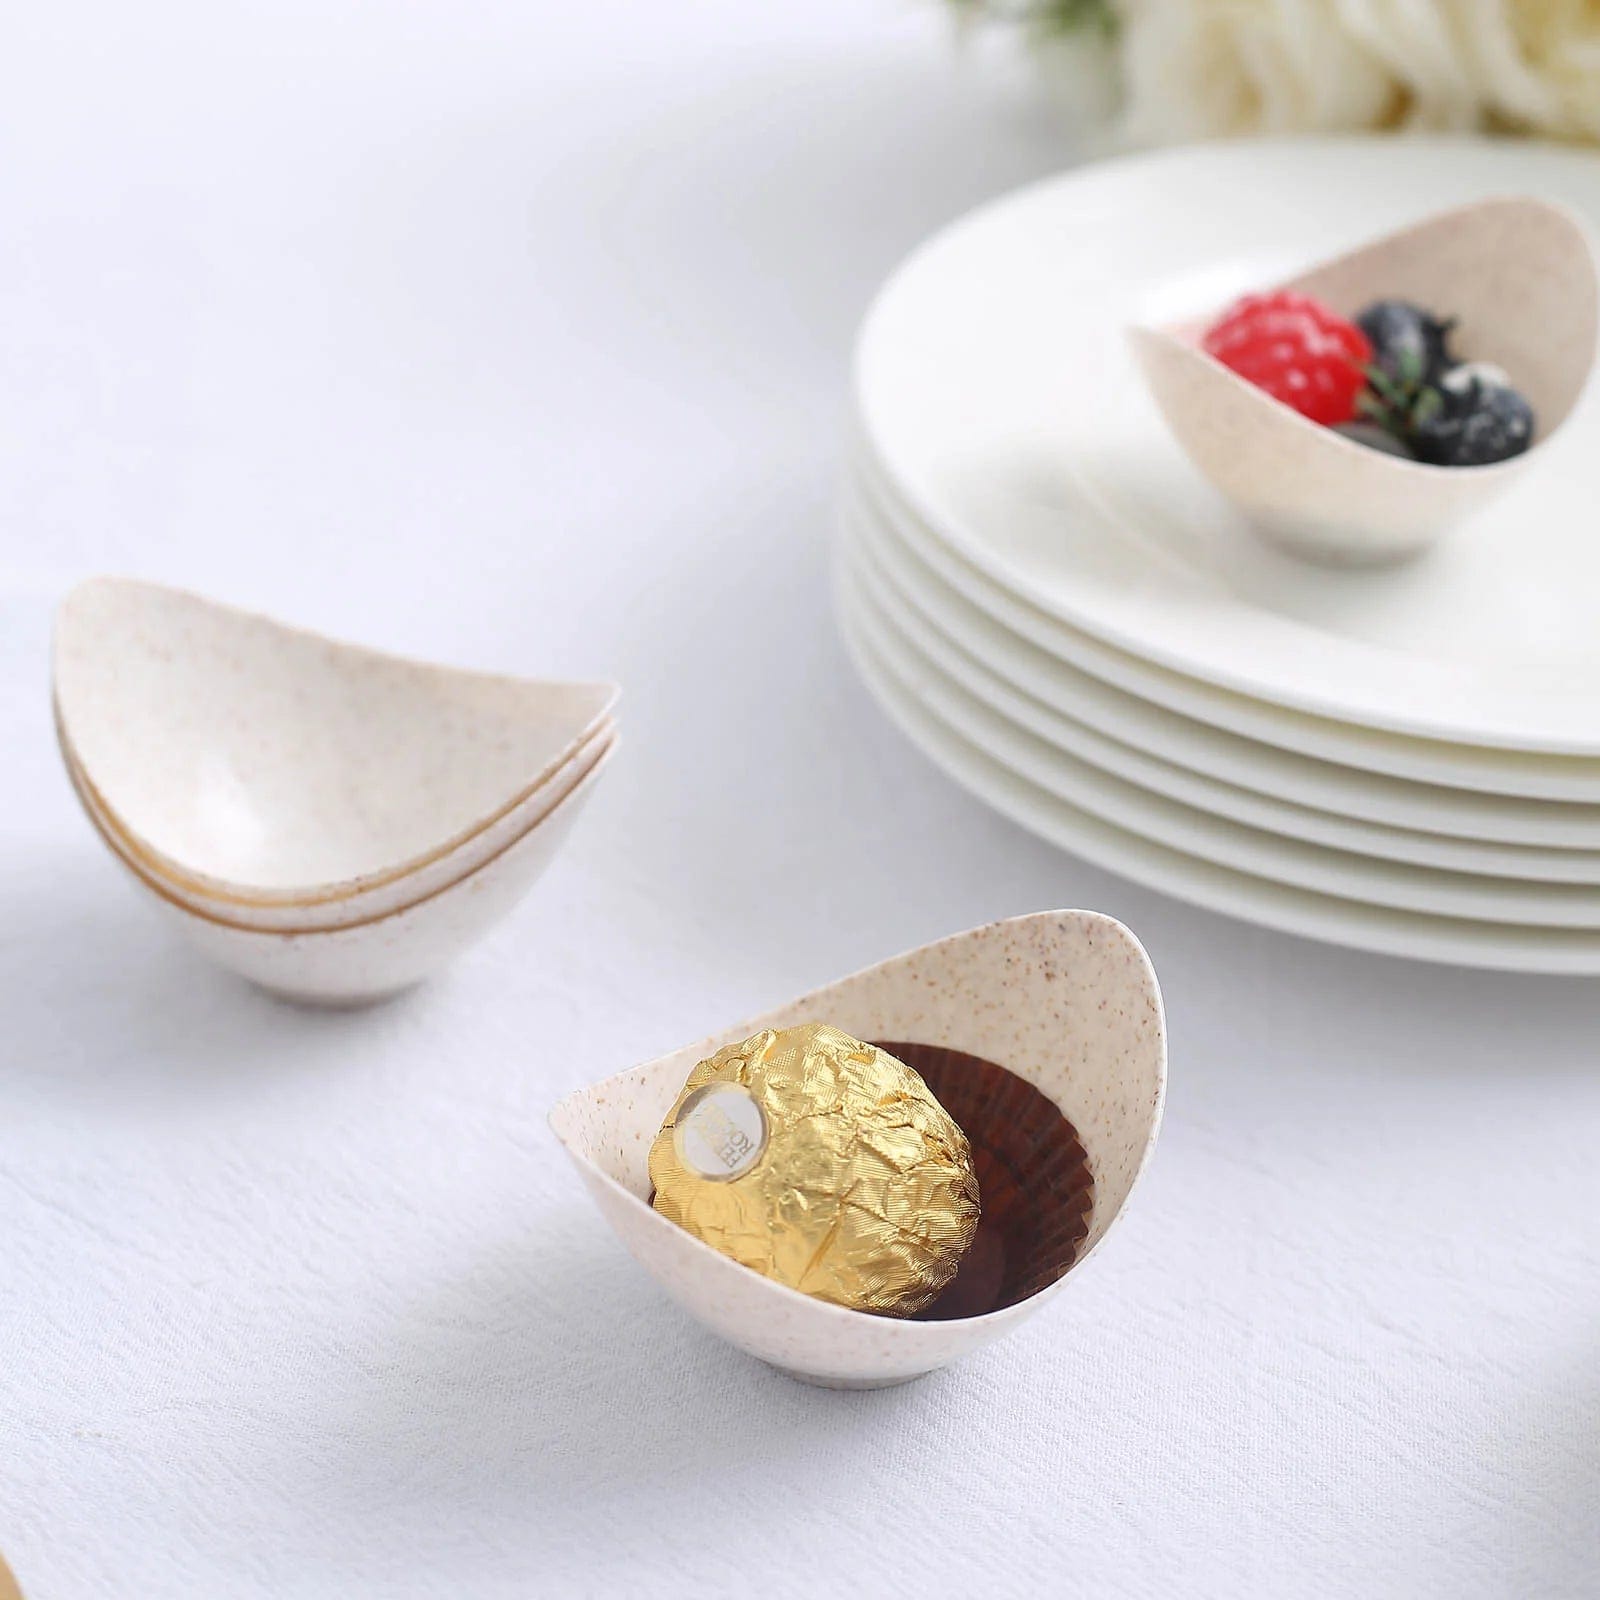 24 Natural 3 in Wheat Straw Fiber Mini Bowls Sustainable Dessert Cups